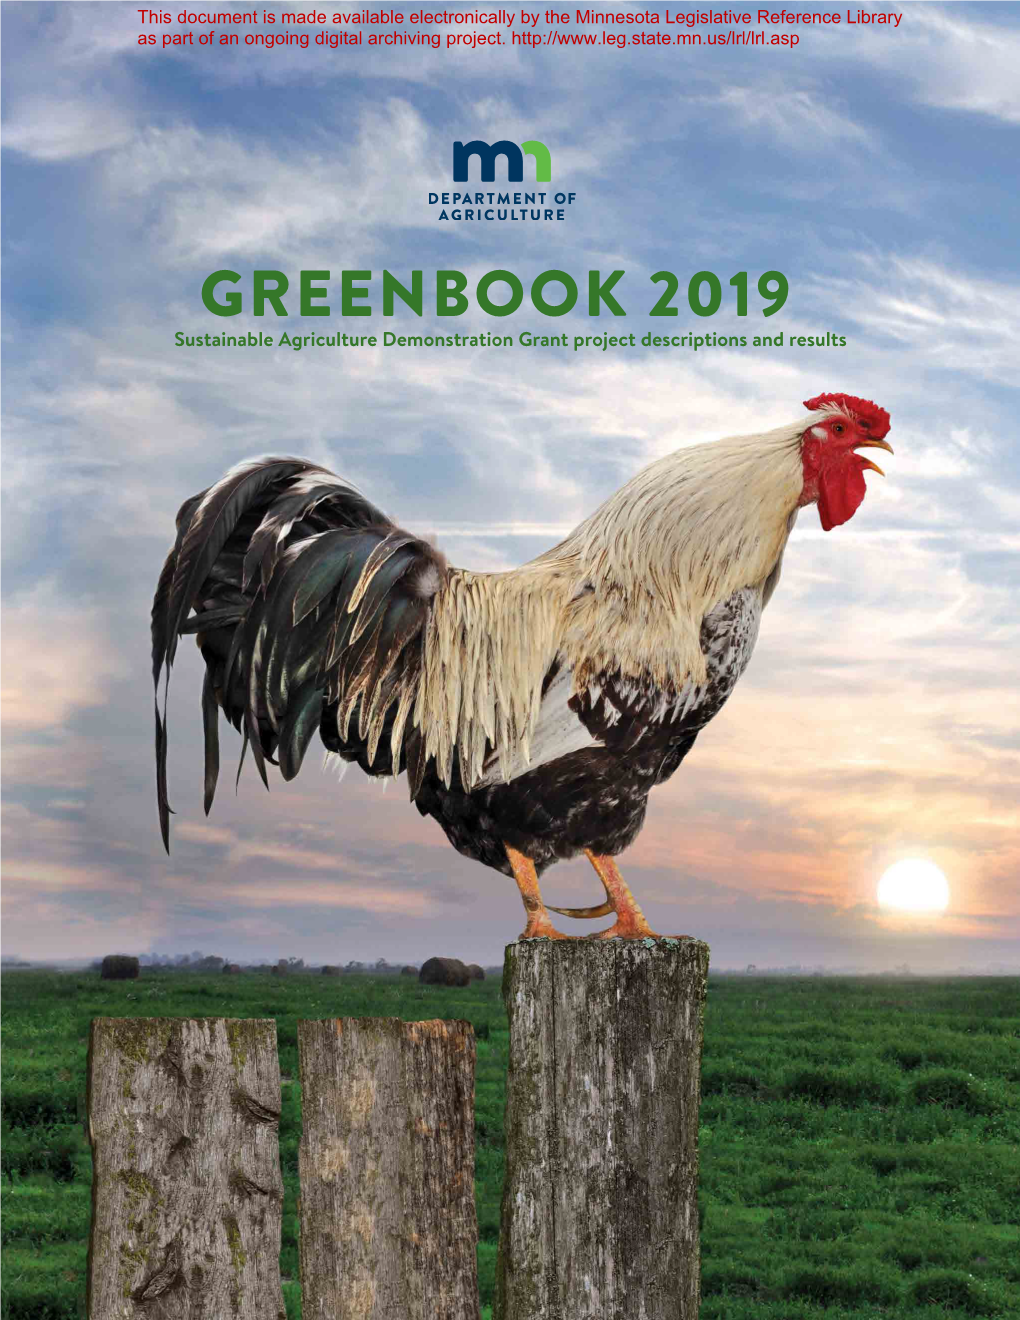 GREENBOOK 2019 Sustainable Agriculture Demonstration Grant Project Descriptions and Results